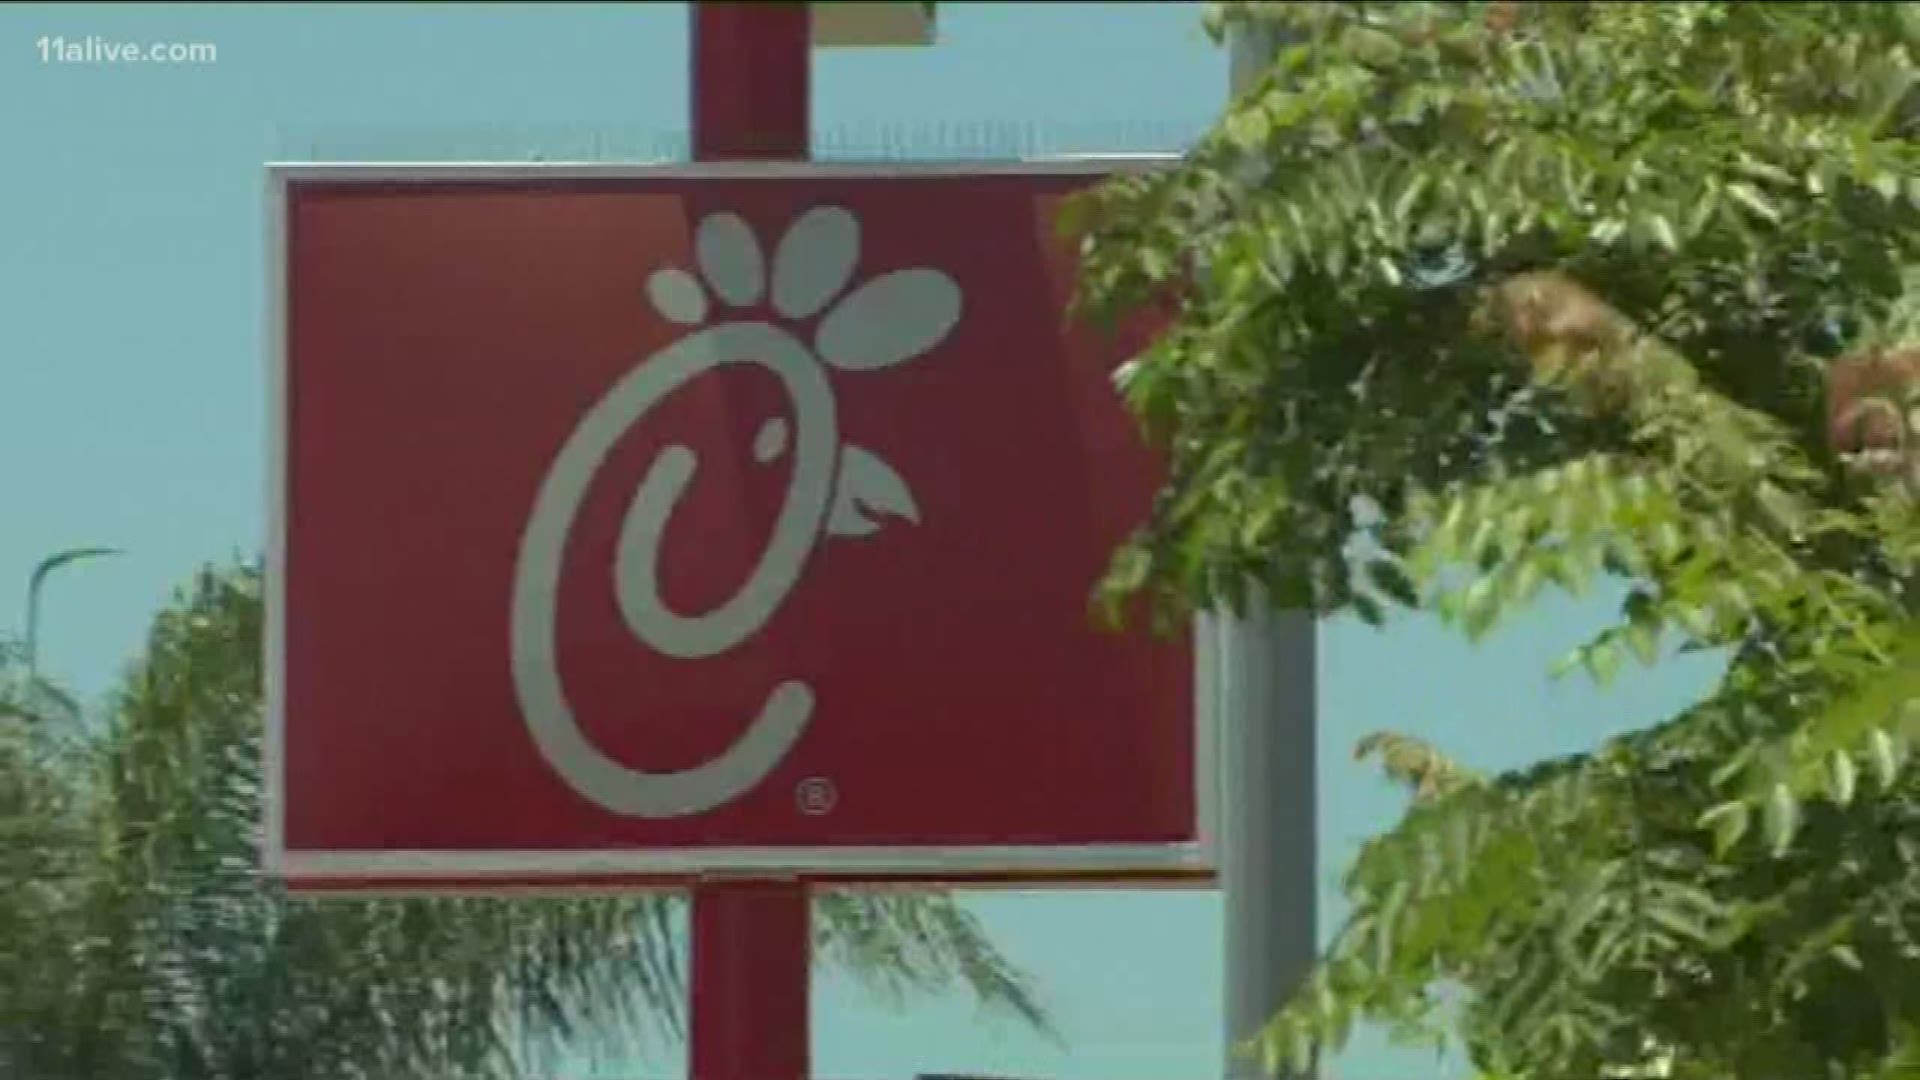 Chick-fil-A announced changes to its donation policy Monday after years of fierce criticism from the LGBTQ+ community.